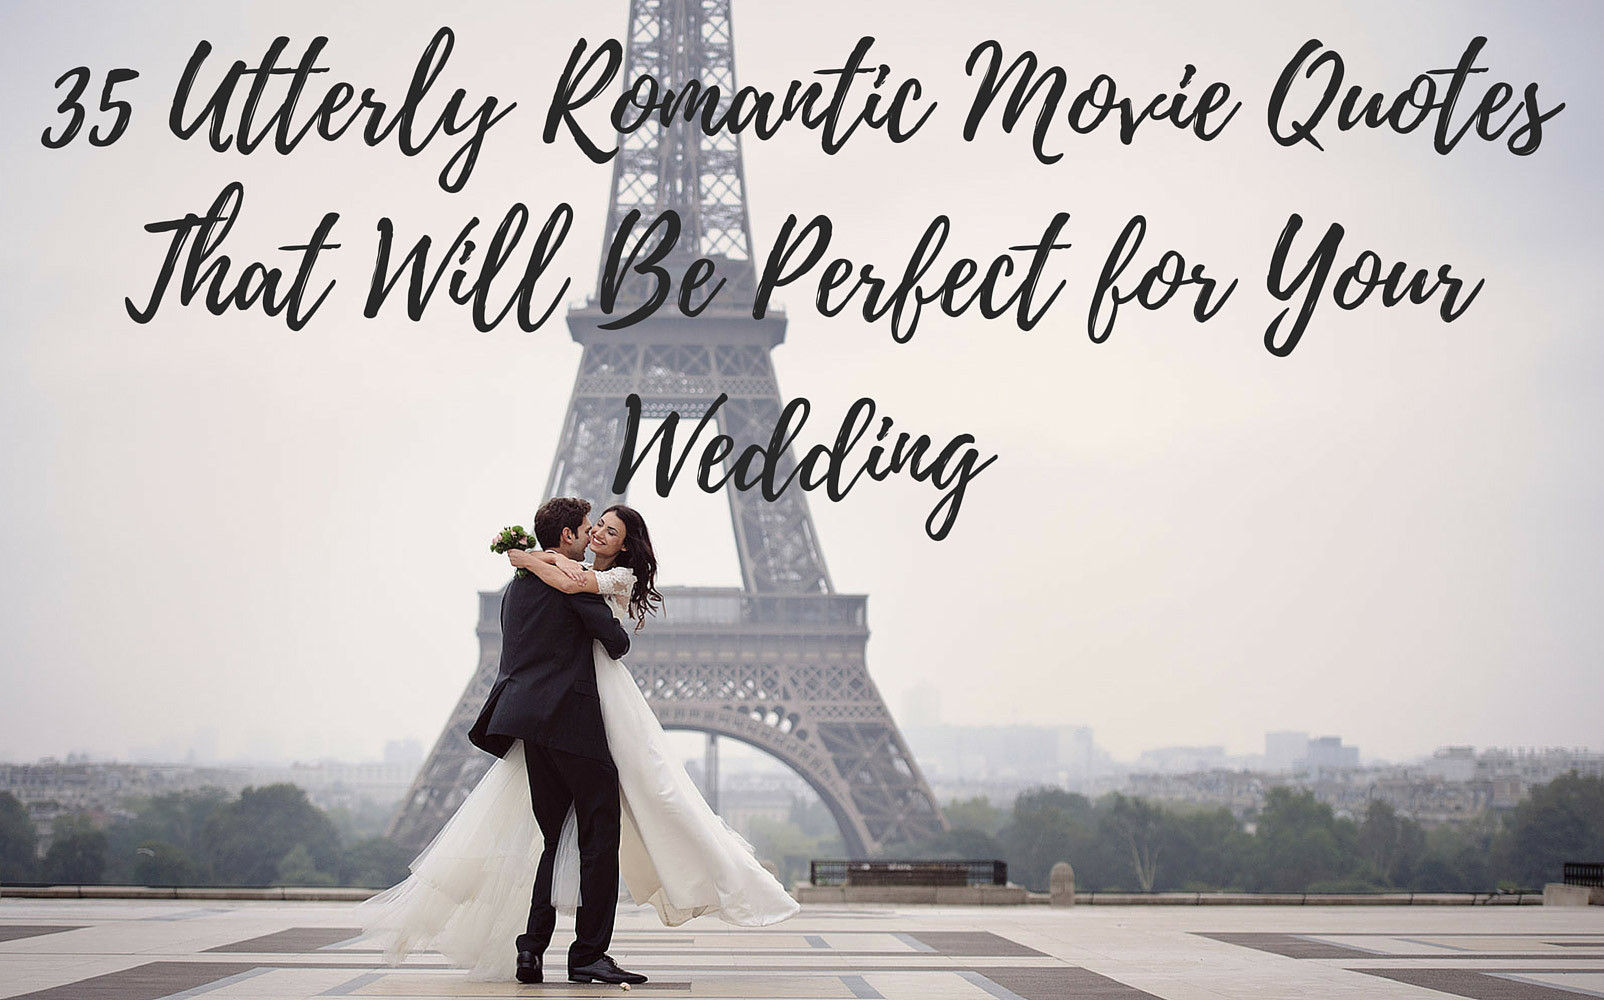 Romantic Wedding Quote
 Utterly Romantic Quotes from Movies